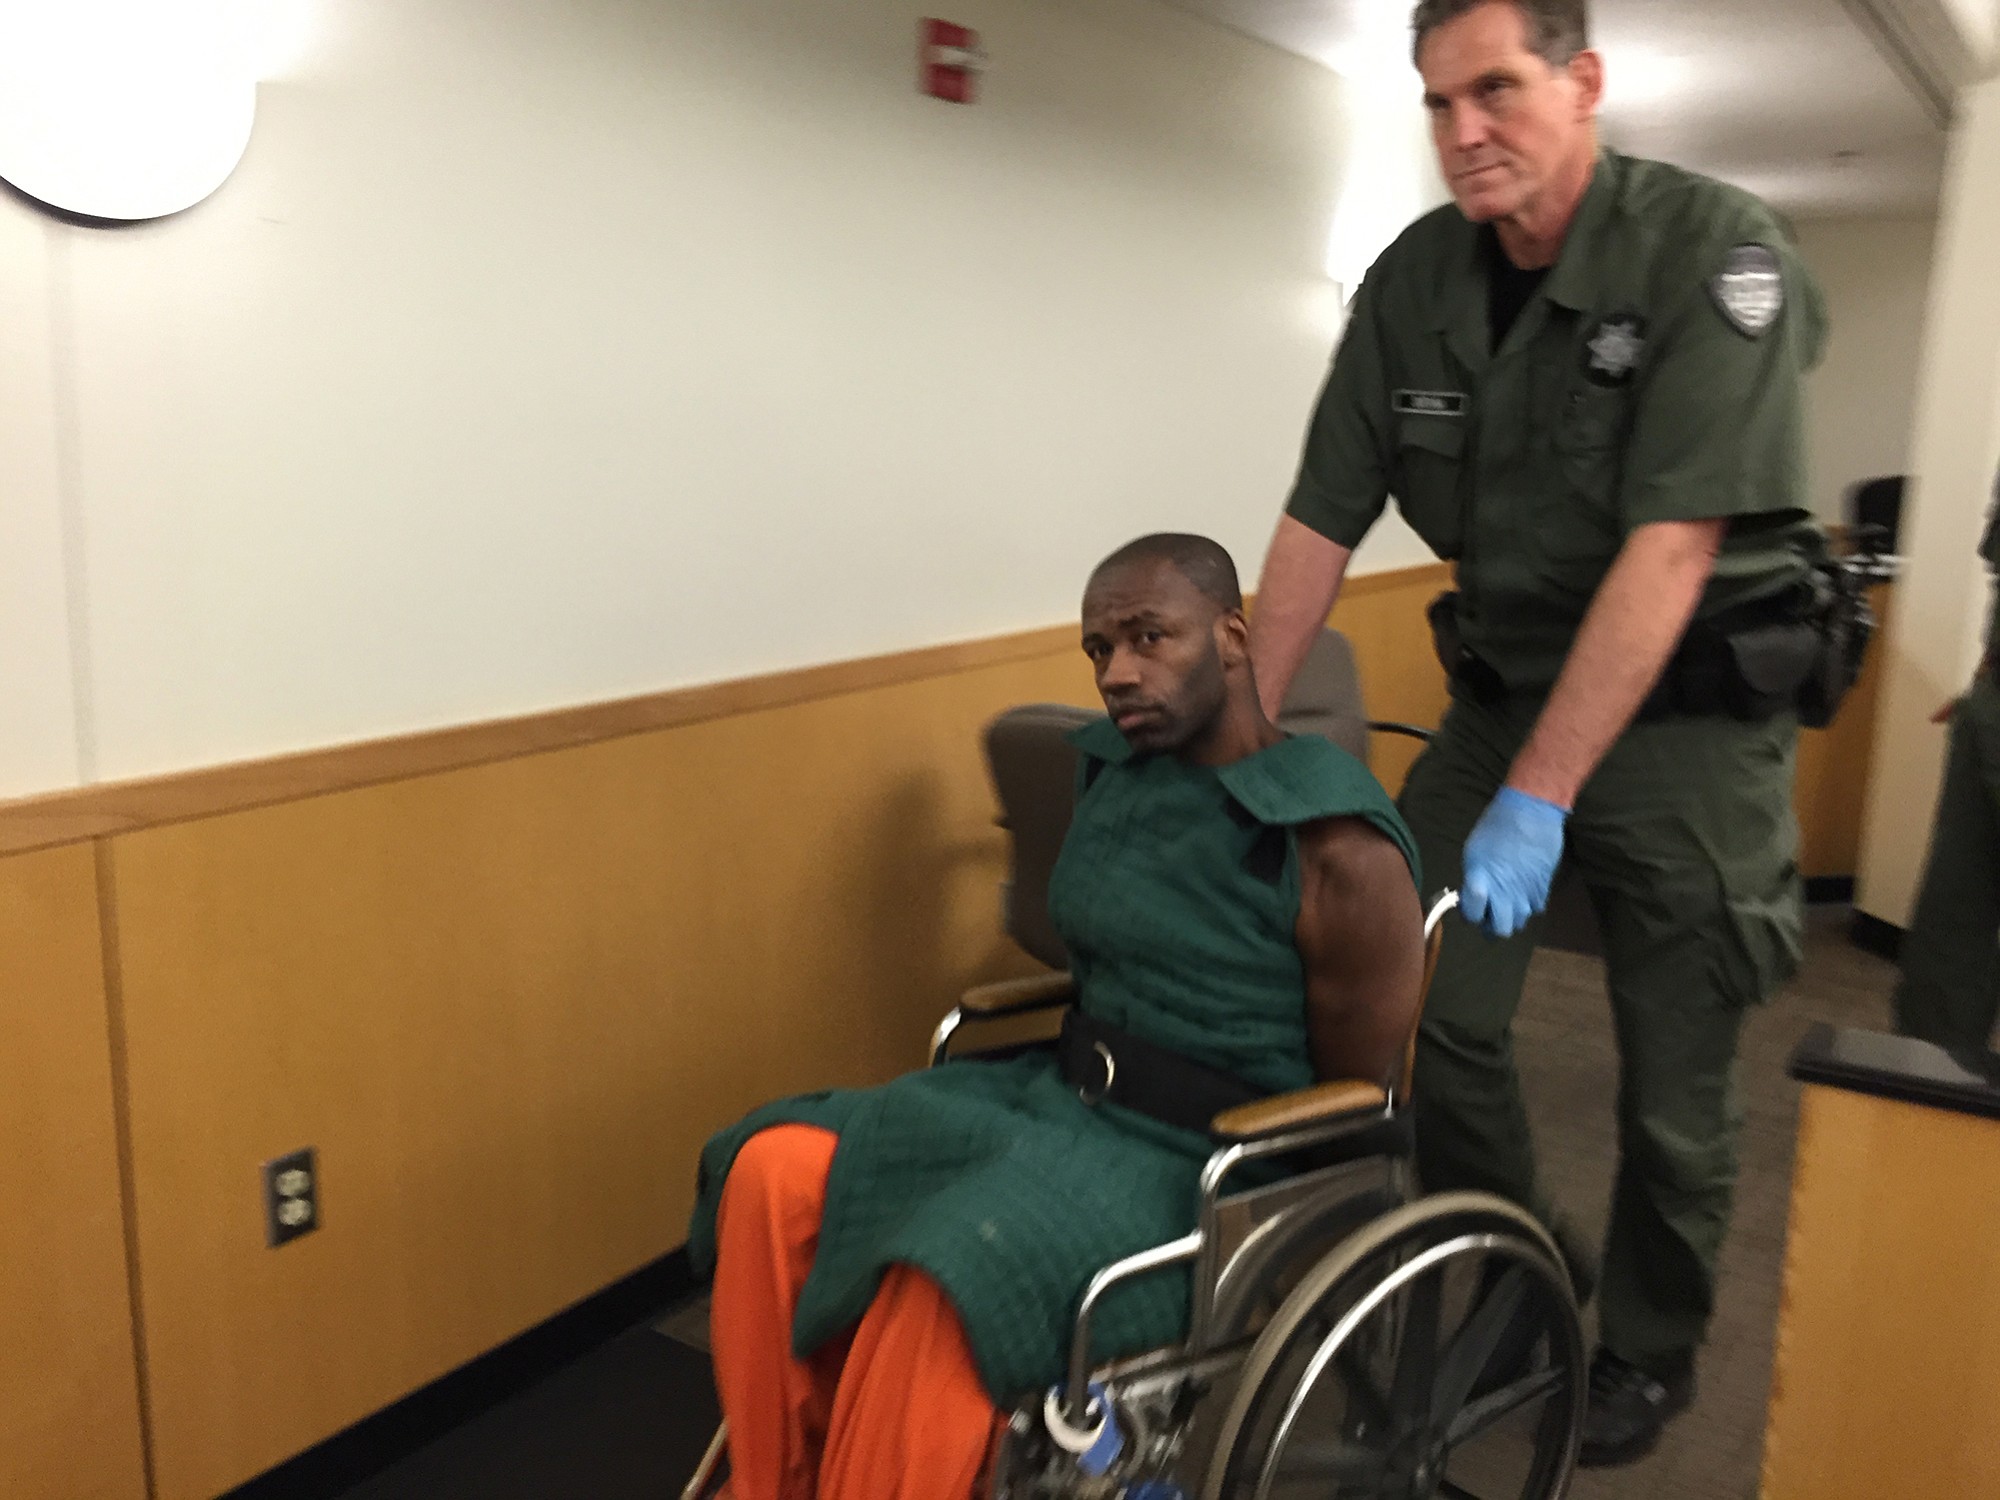 Gregory Antonio Wright, 34, of Vancouver is wheeled out of Clark County Superior Court on Friday after a judge ordered that he undergo a mental competency evaluation.